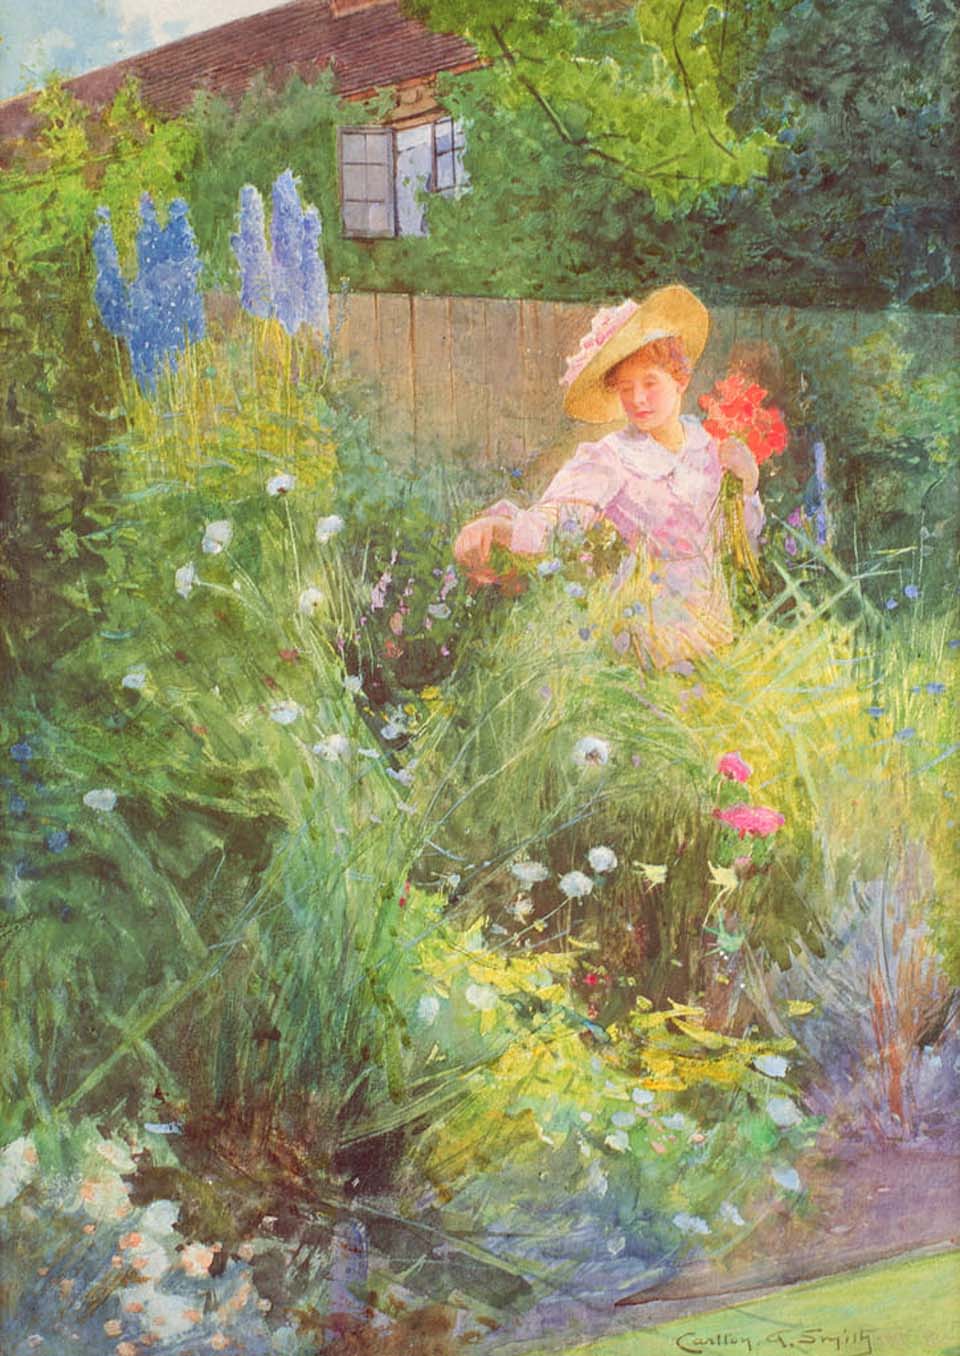 Lady picking flowers in a country garden